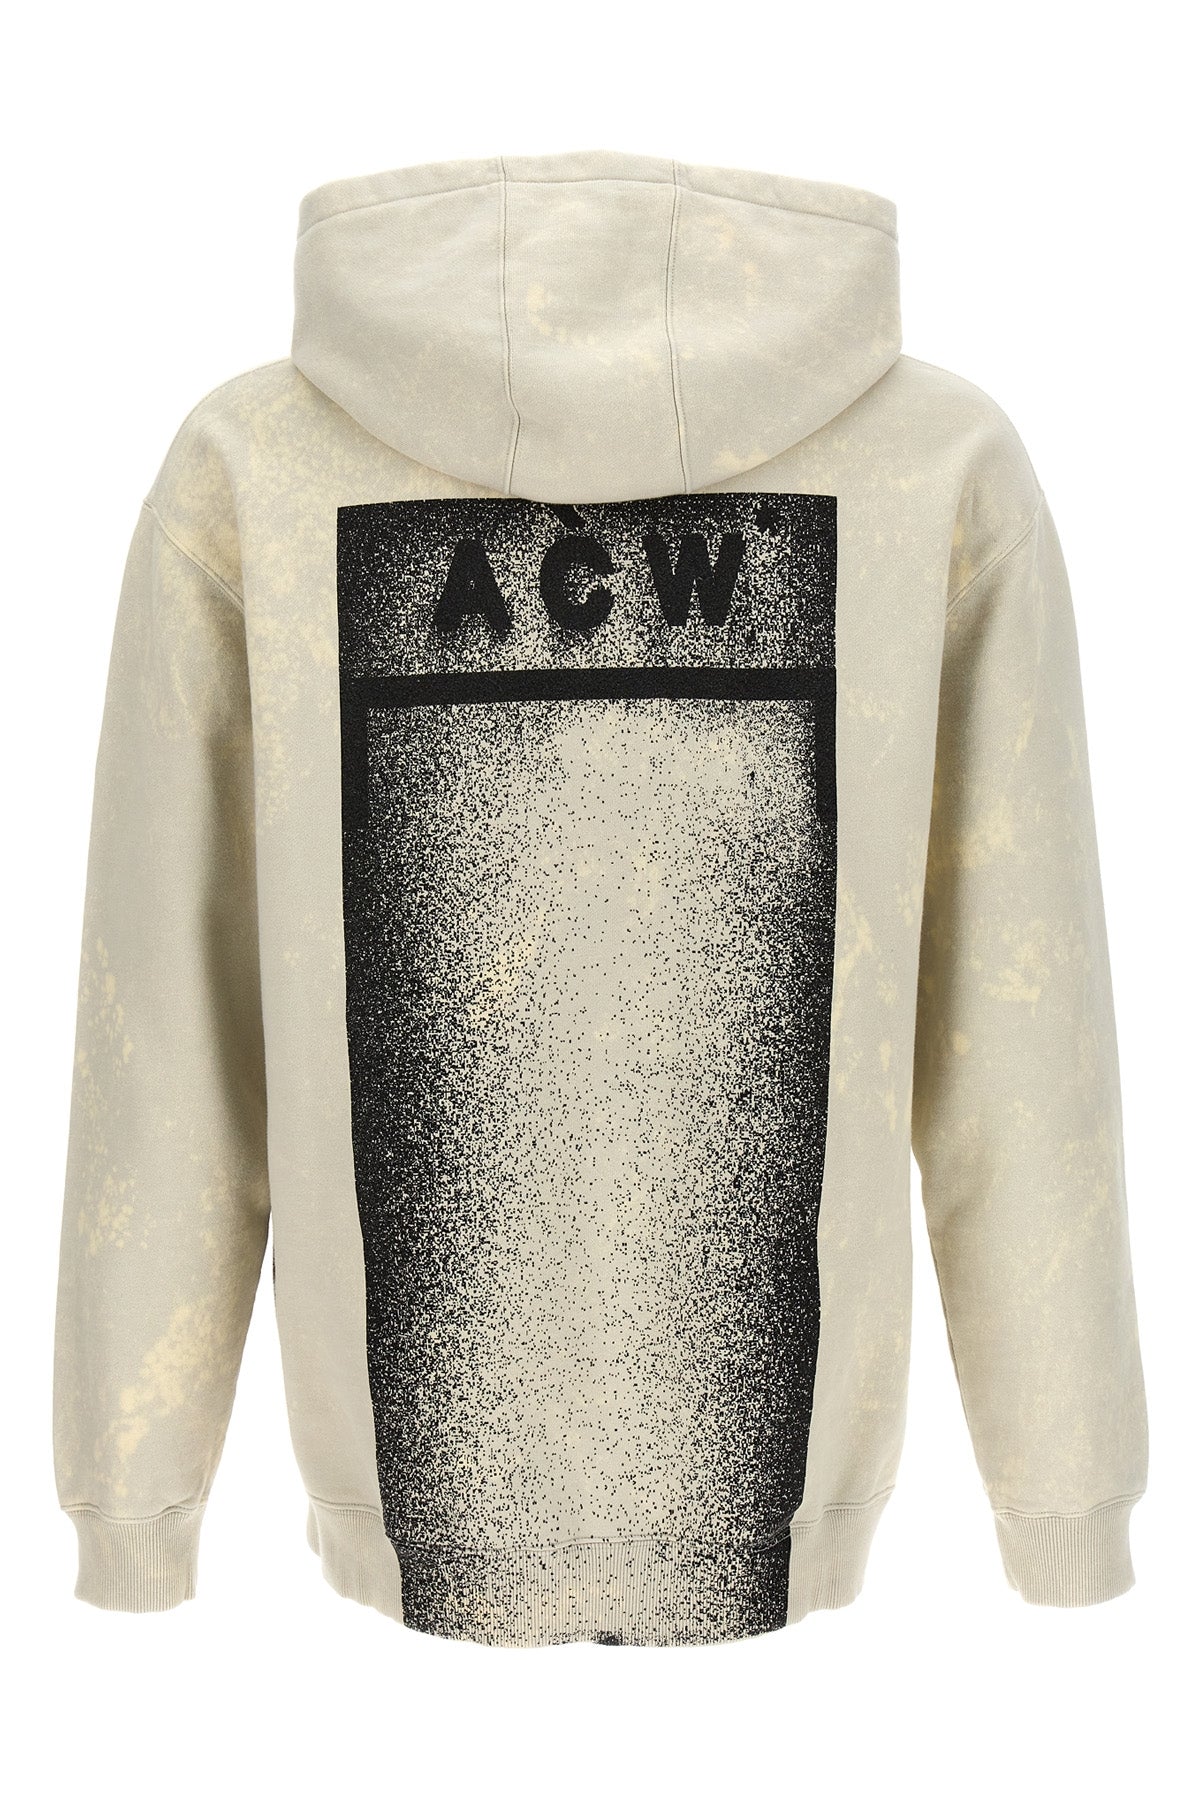 A-COLD-WALL* 'BOUCHARDS' HOODIE